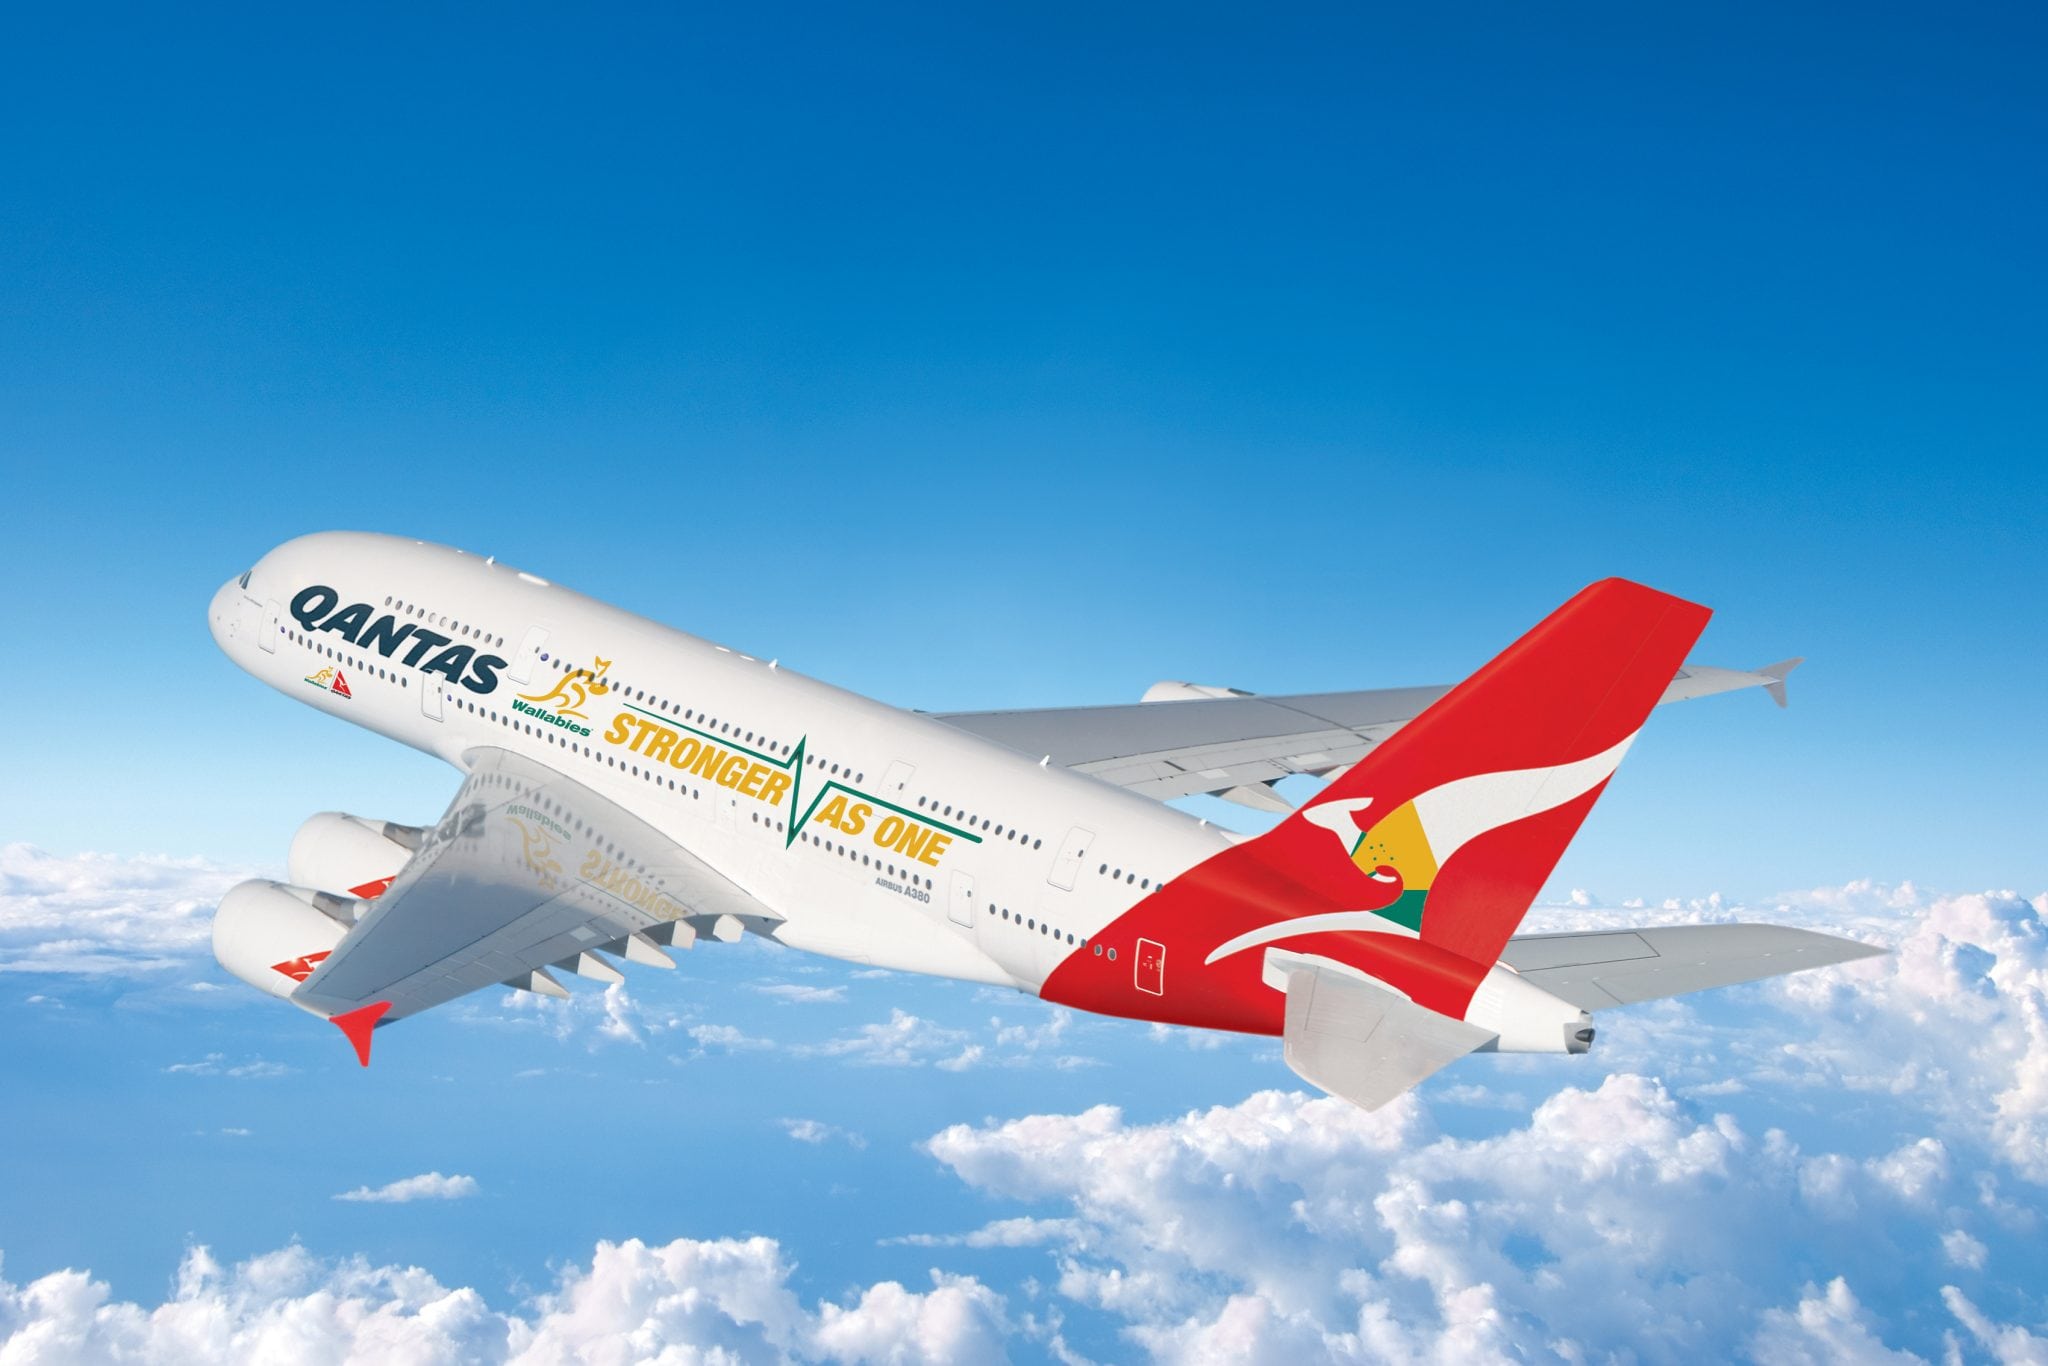 Qantas has selected ViaSat as its connectivity provider for domestic flights